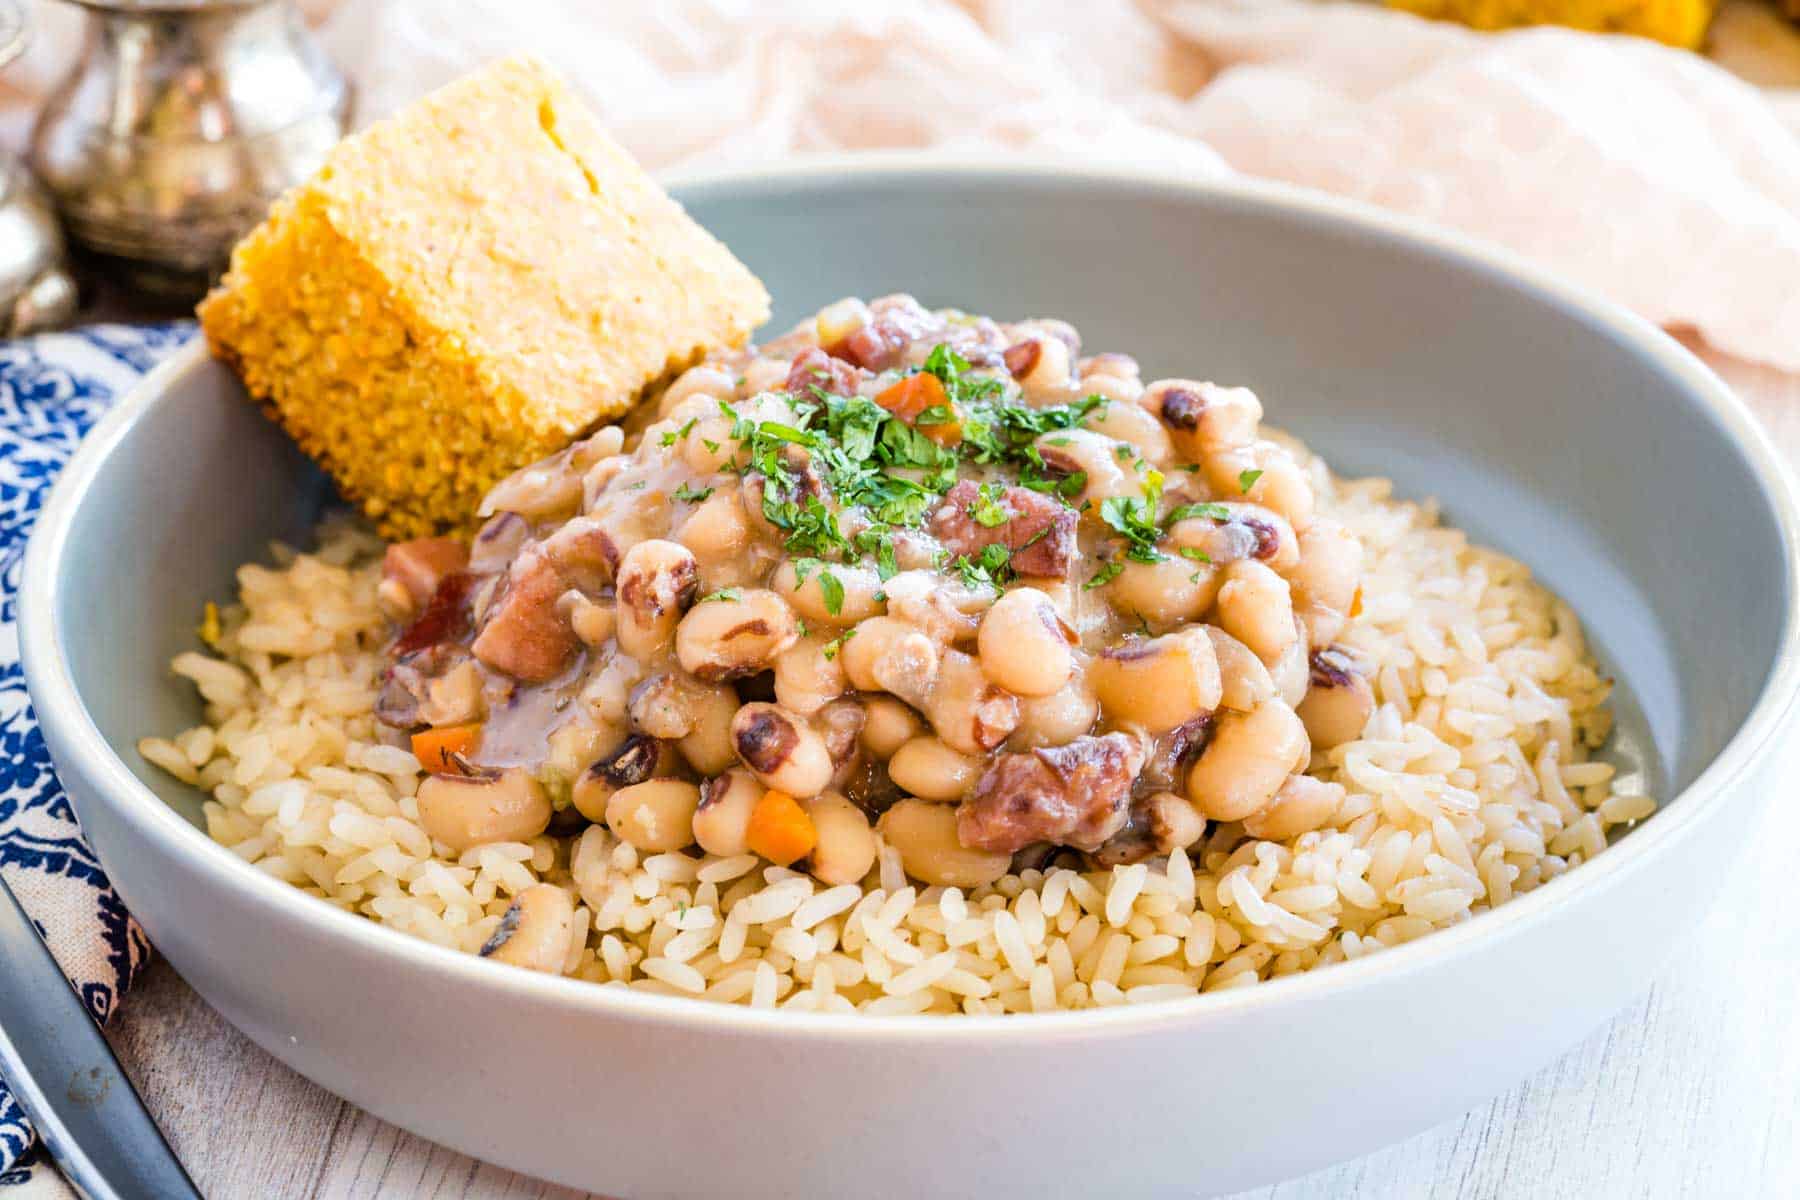 Black eyed peas served over rice, with a side of corn bread.